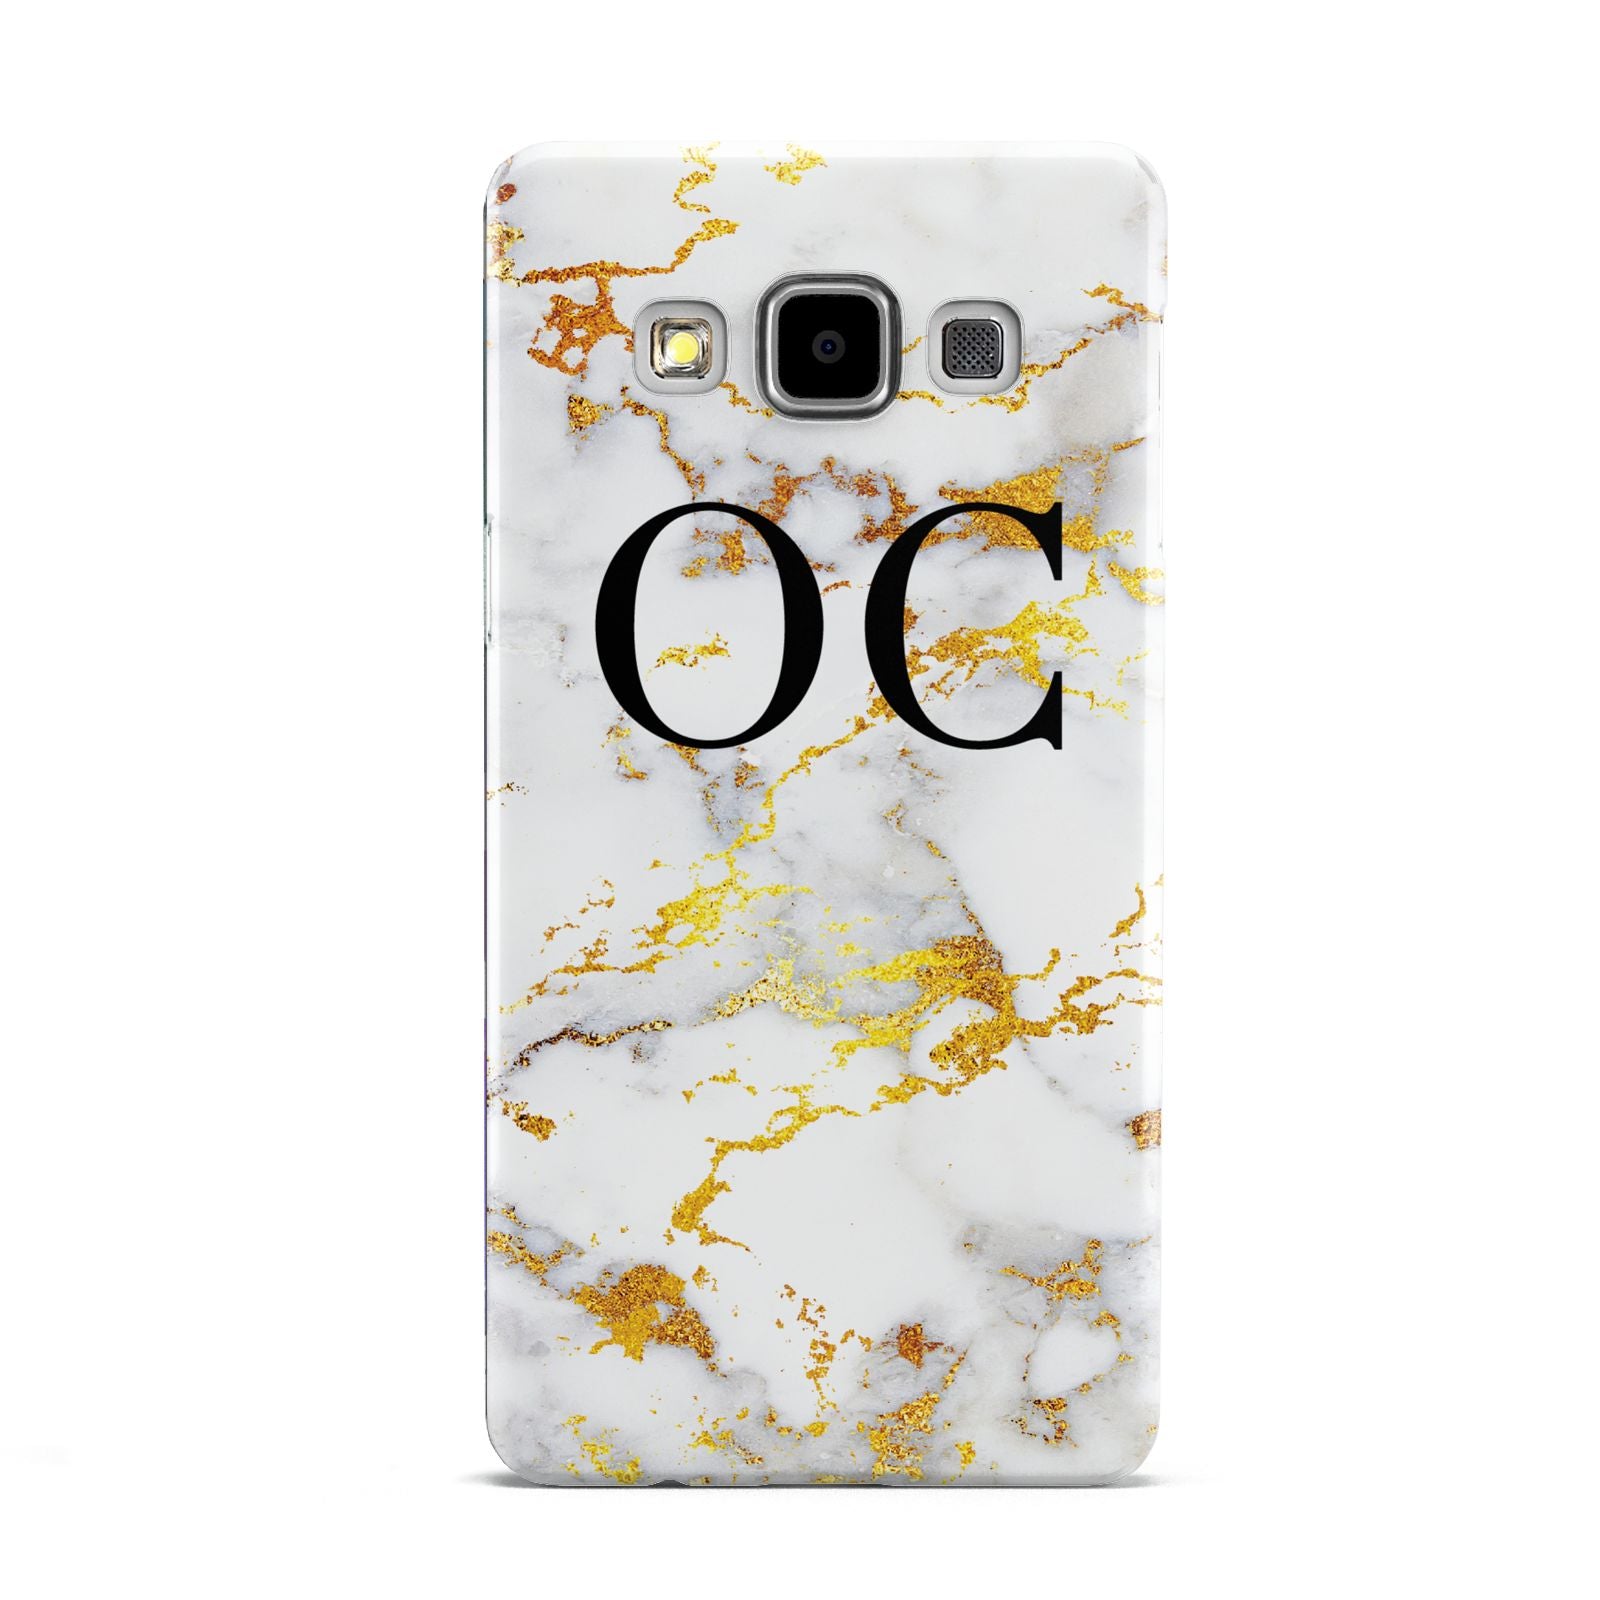 Personalised Gold Marble Initials Monogram Samsung Galaxy A5 Case